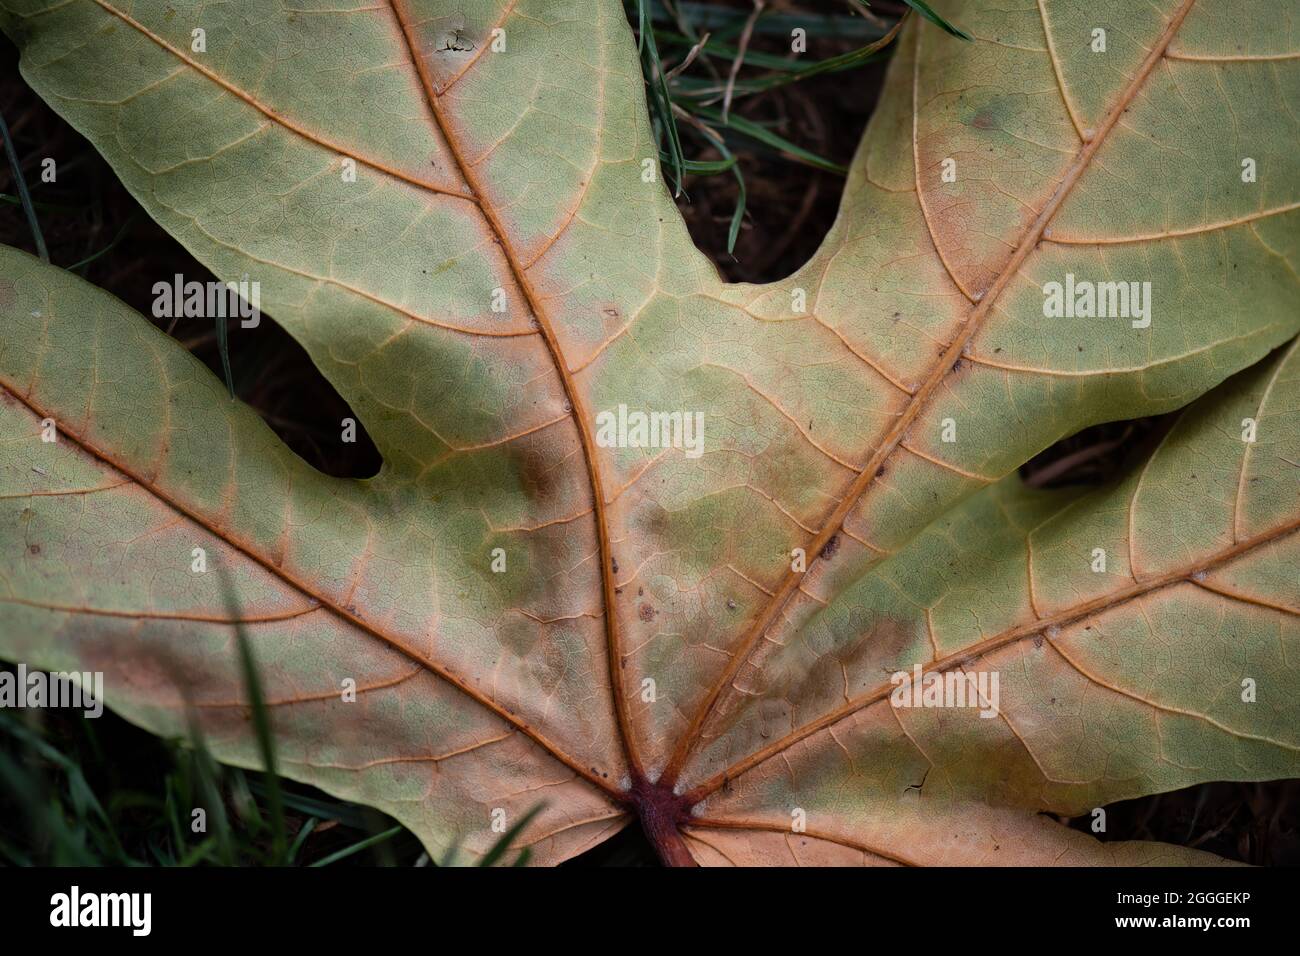 Close up details of dried fallen leaf representing changing seasons summer to autumn Stock Photo